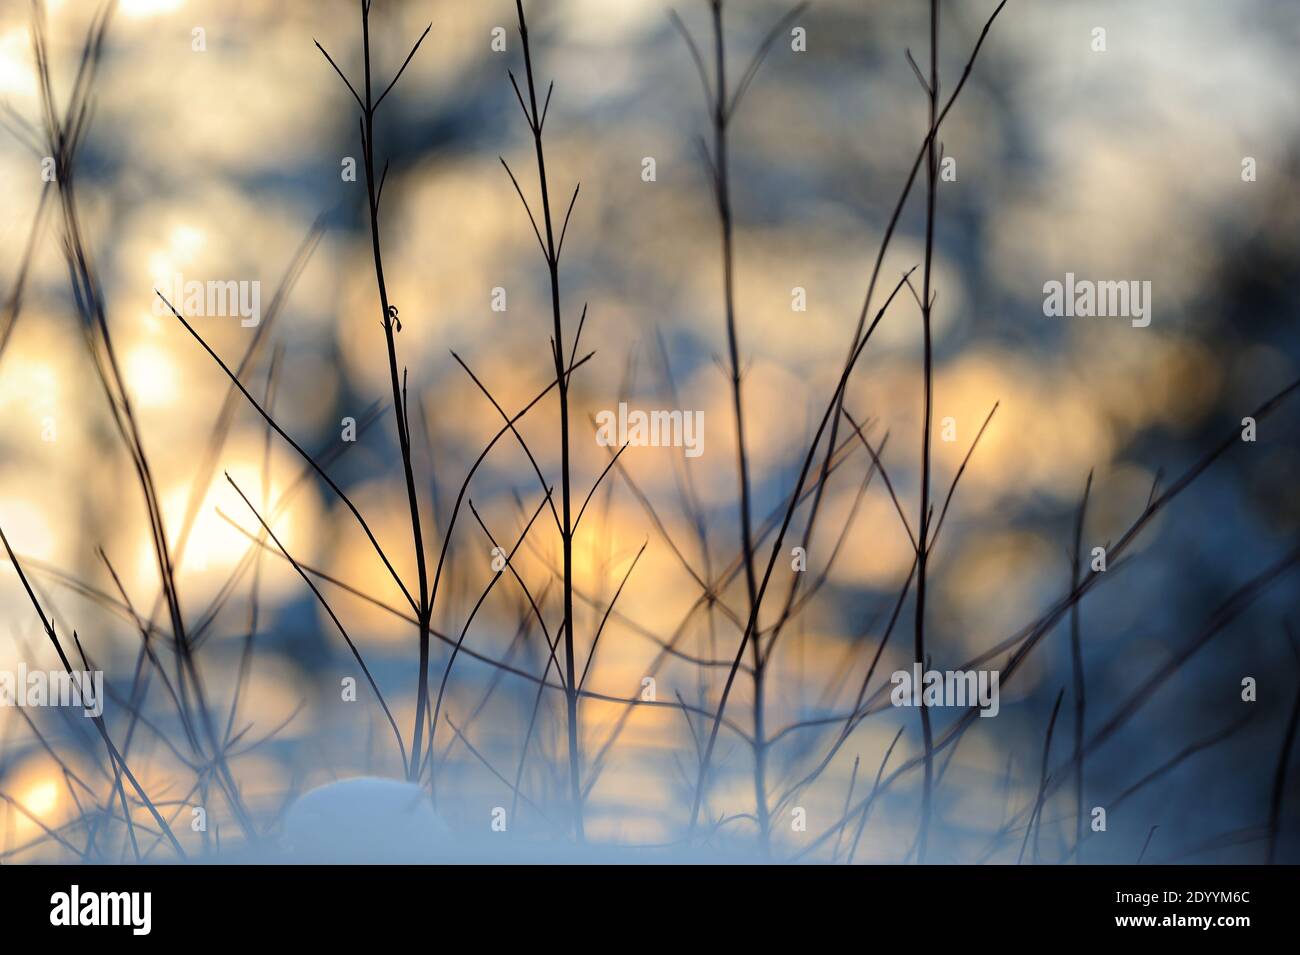 Siberian dogwood (Cornus alba 'Sibirica') branches in snow against setting sun. Selective focus and shallow depth of field. Stock Photo